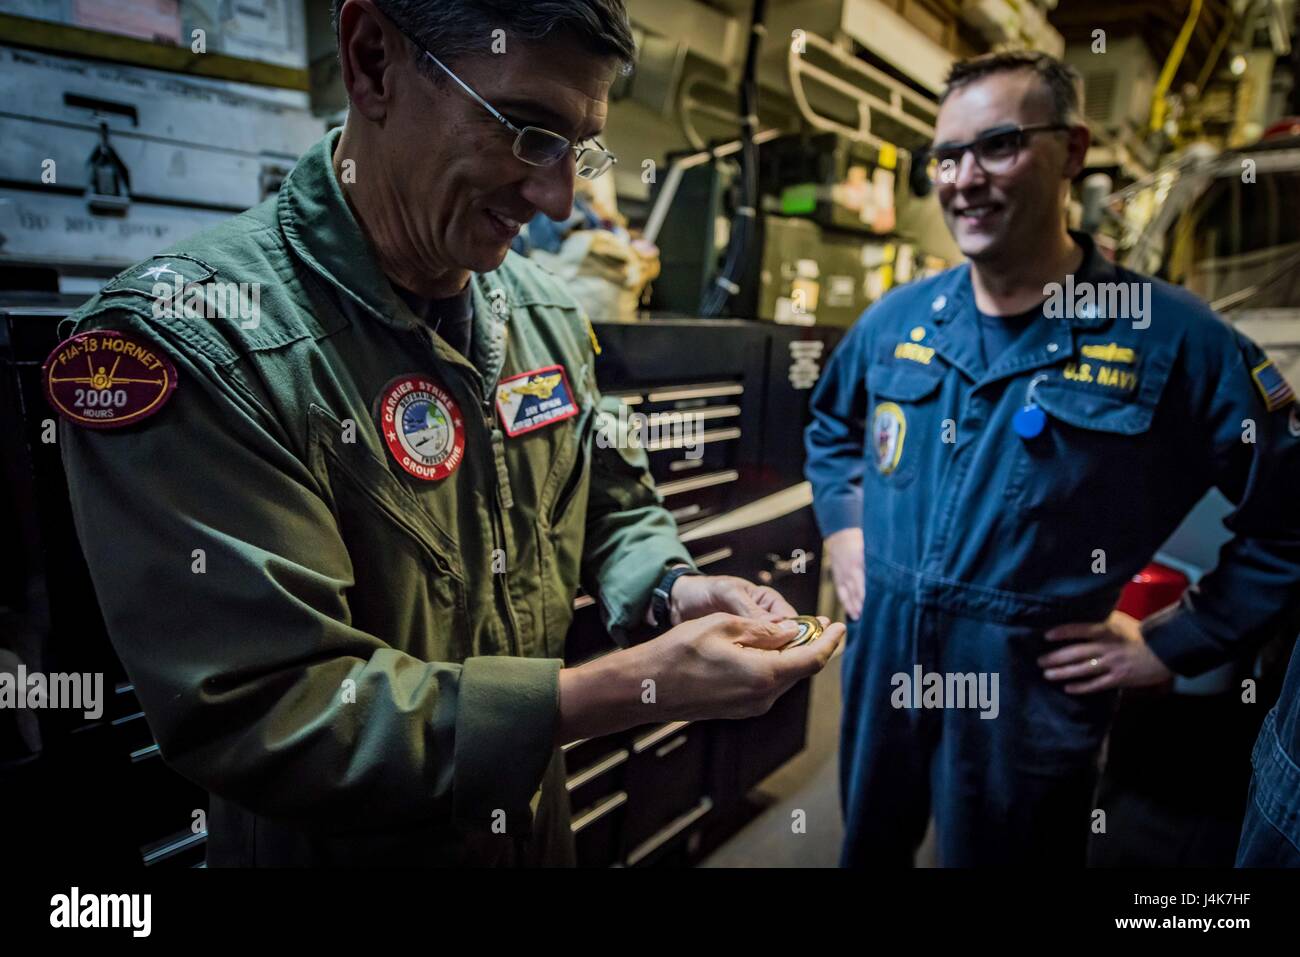 170503-N-TV230-281 PACIFIC OCEAN (May 3, 2017) Rear Adm. James Bynum, commander of Carrier Strike Group (CCSG) 9, right, receives challenge coins from Cmdr. Tim LaBenz, commanding officer of the guided-missile destroyer USS Sampson (DDG) 102, during a Group Sail training unit exercise (GRUSL) with the Theodore Roosevelt Carrier strike Group (TRCSG). GRUSL is the first step in the Theodore Roosevelt’s integrated training phase and aims to enhance mission-readiness and warfighting capabilities between the ships, airwing and the staffs of the TRCSG through simulated real-world scenarios. (U.S. Na Stock Photo